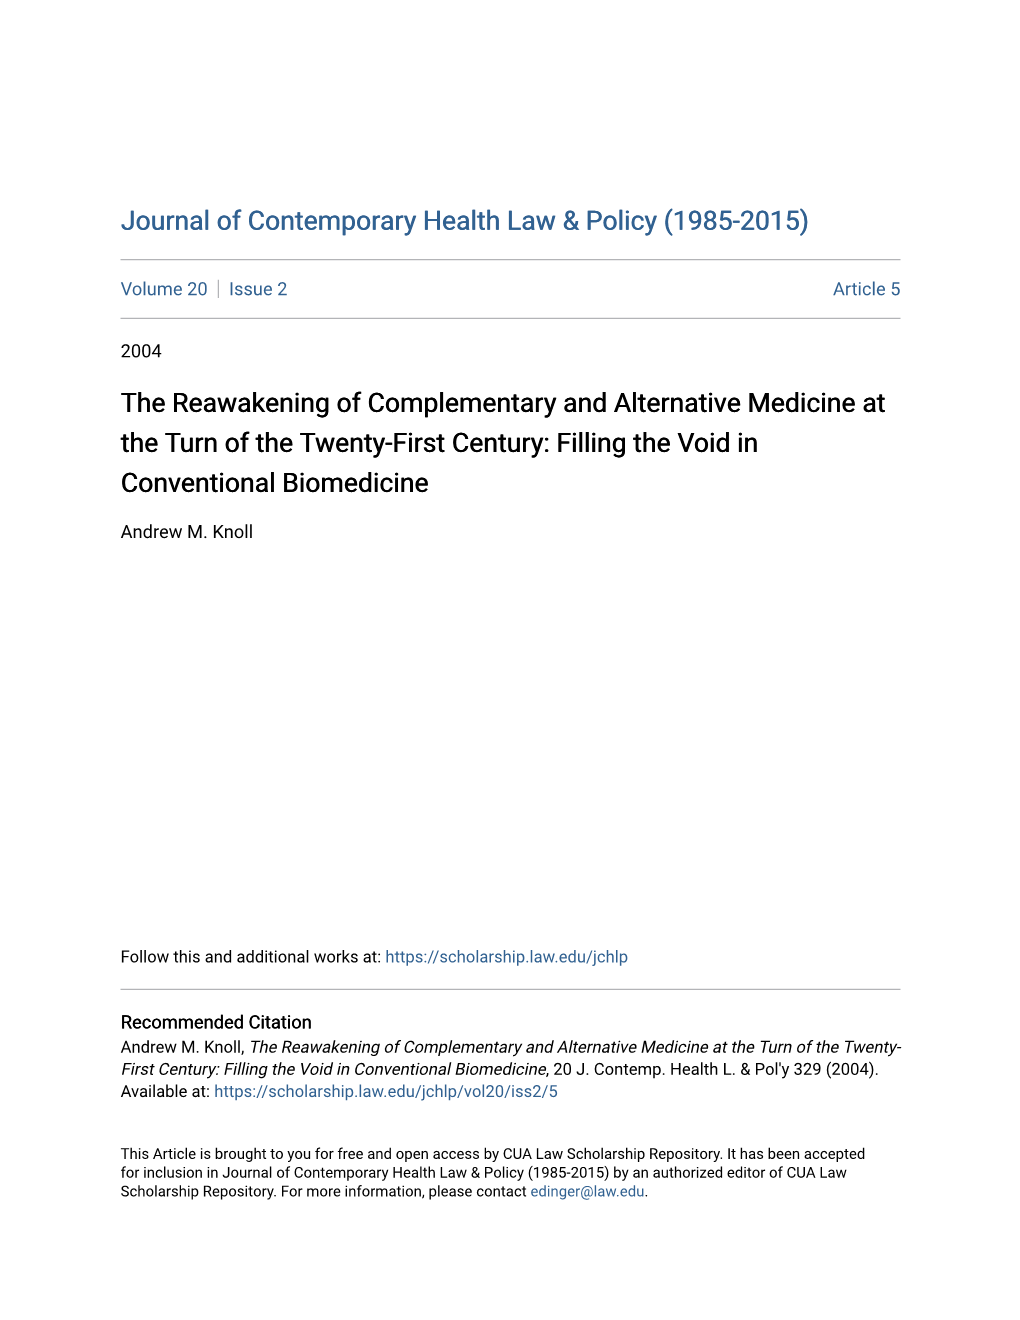 The Reawakening of Complementary and Alternative Medicine at the Turn of the Twenty-First Century: Filling the Void in Conventional Biomedicine